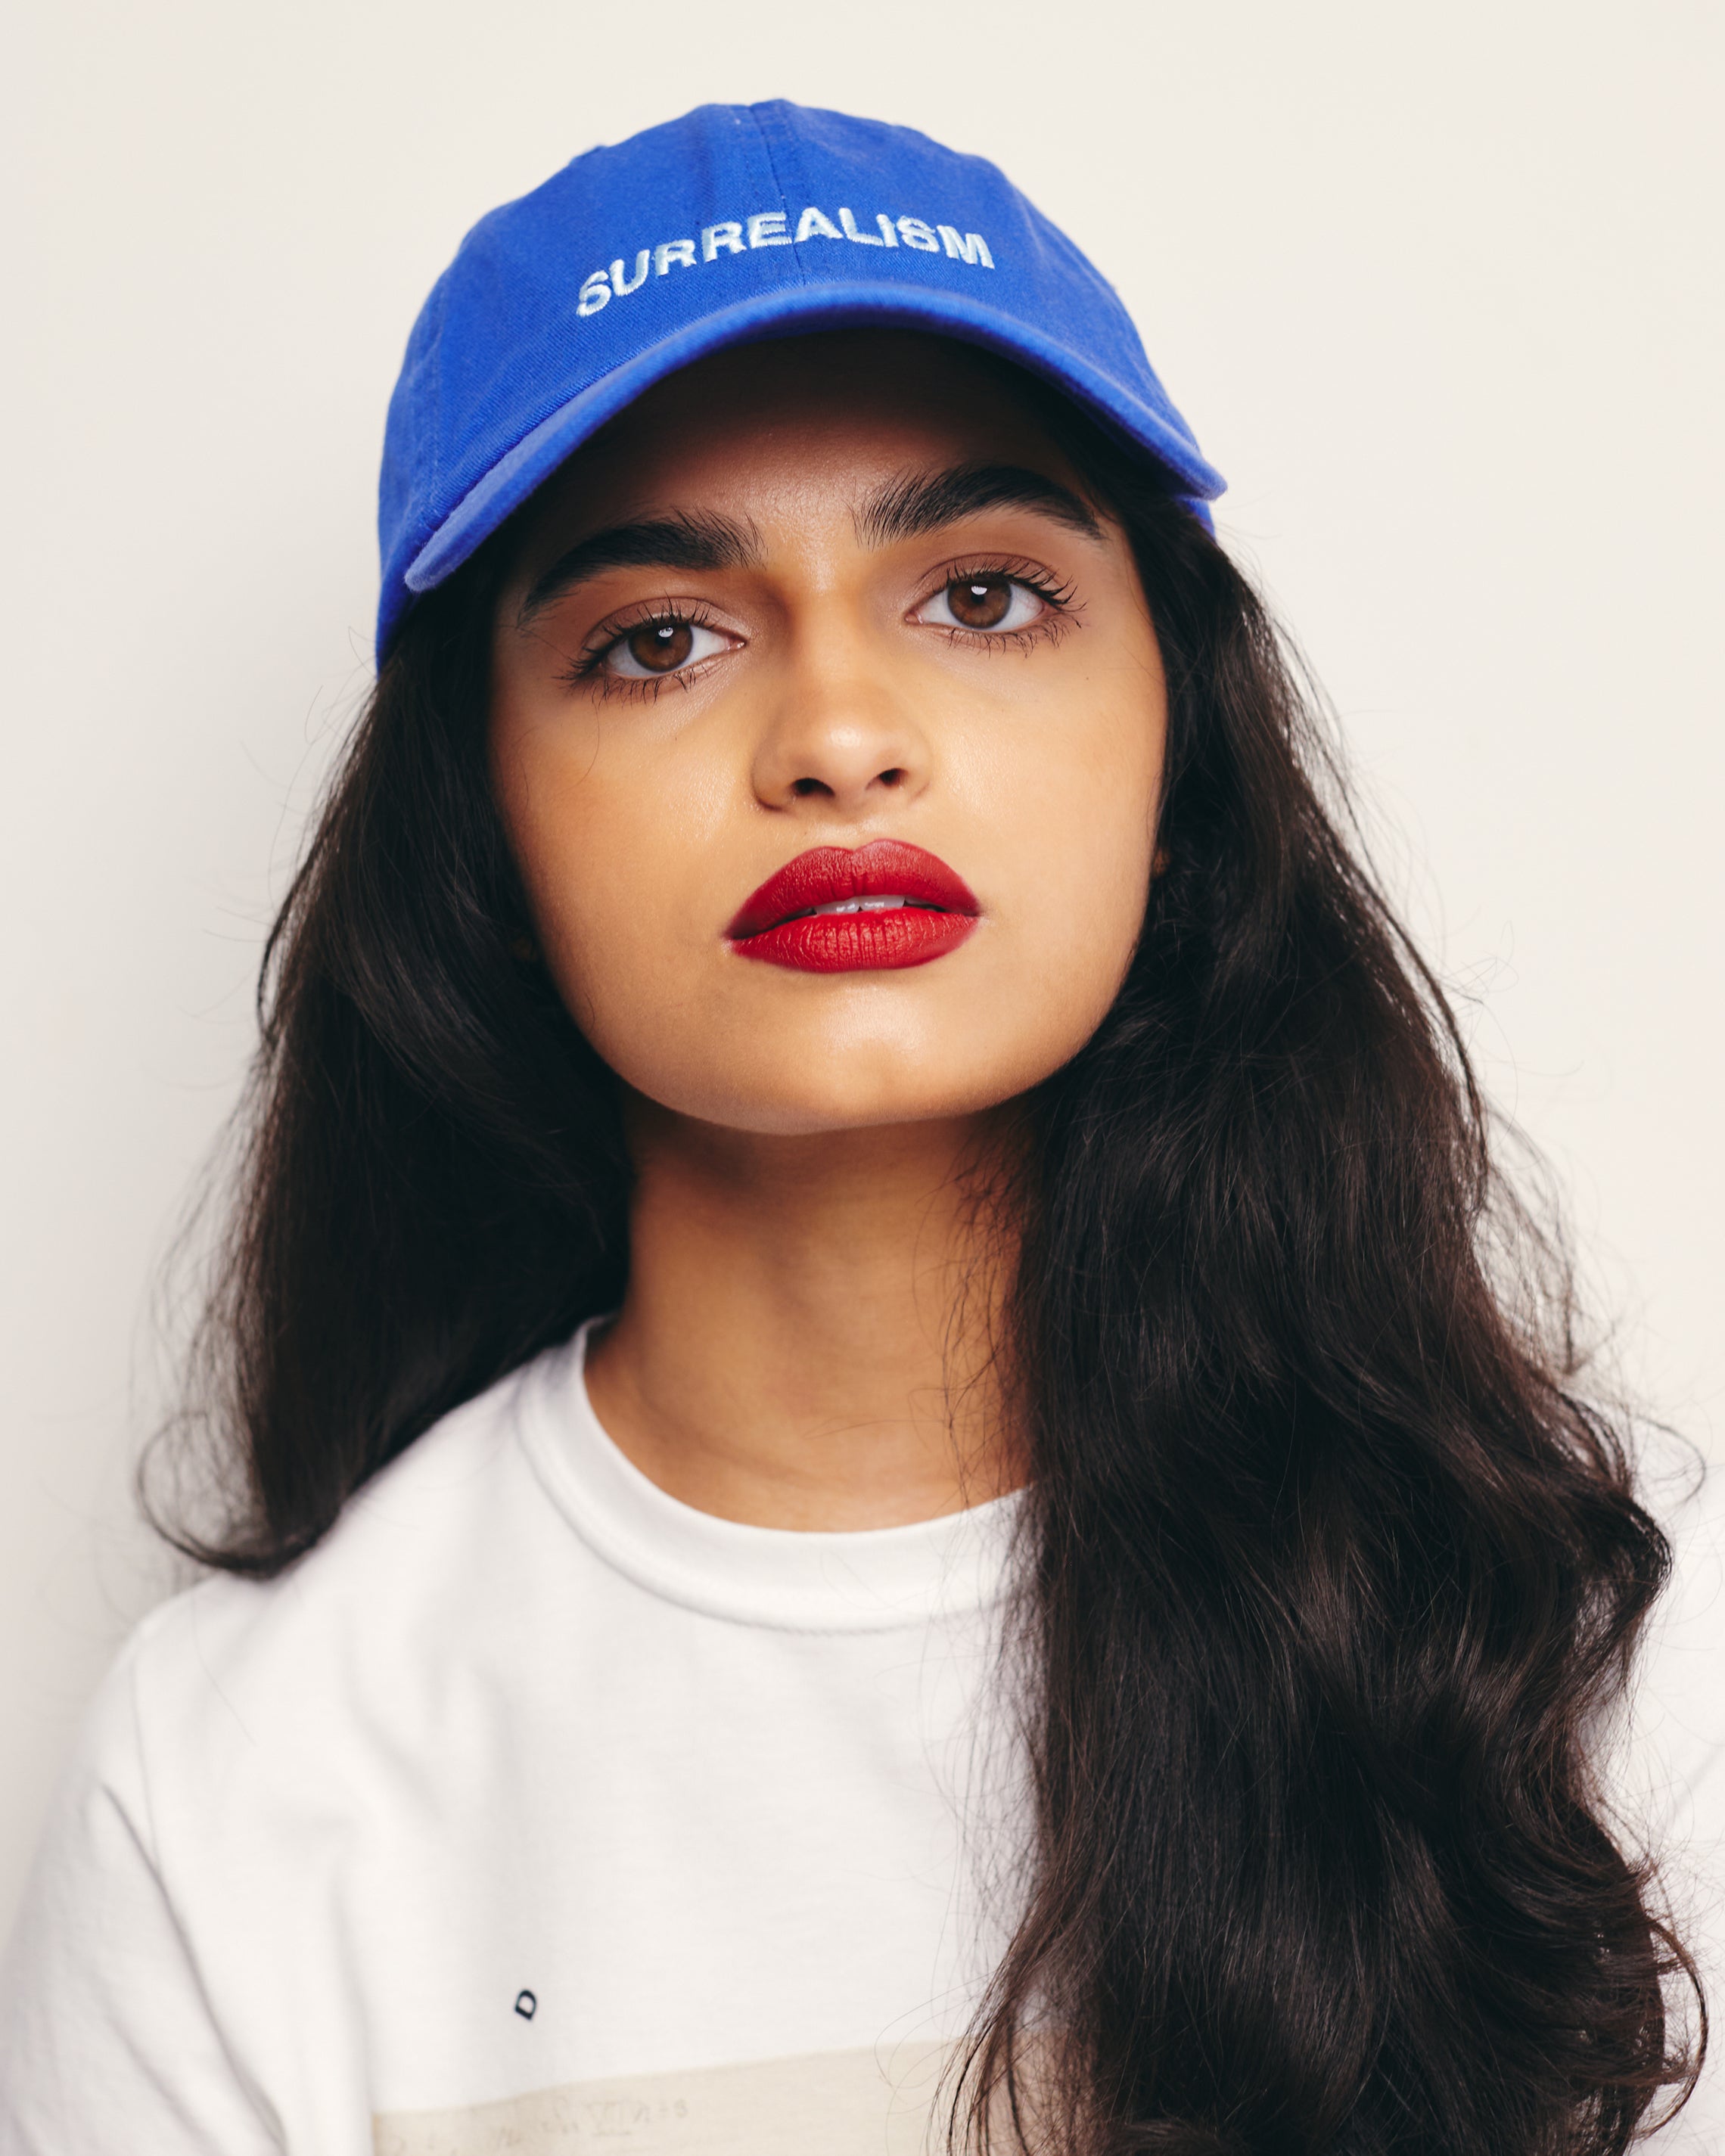 Mira Bhat Wears Royal Blue Dad Hat With Surrealism Embroidery Art Movement Text